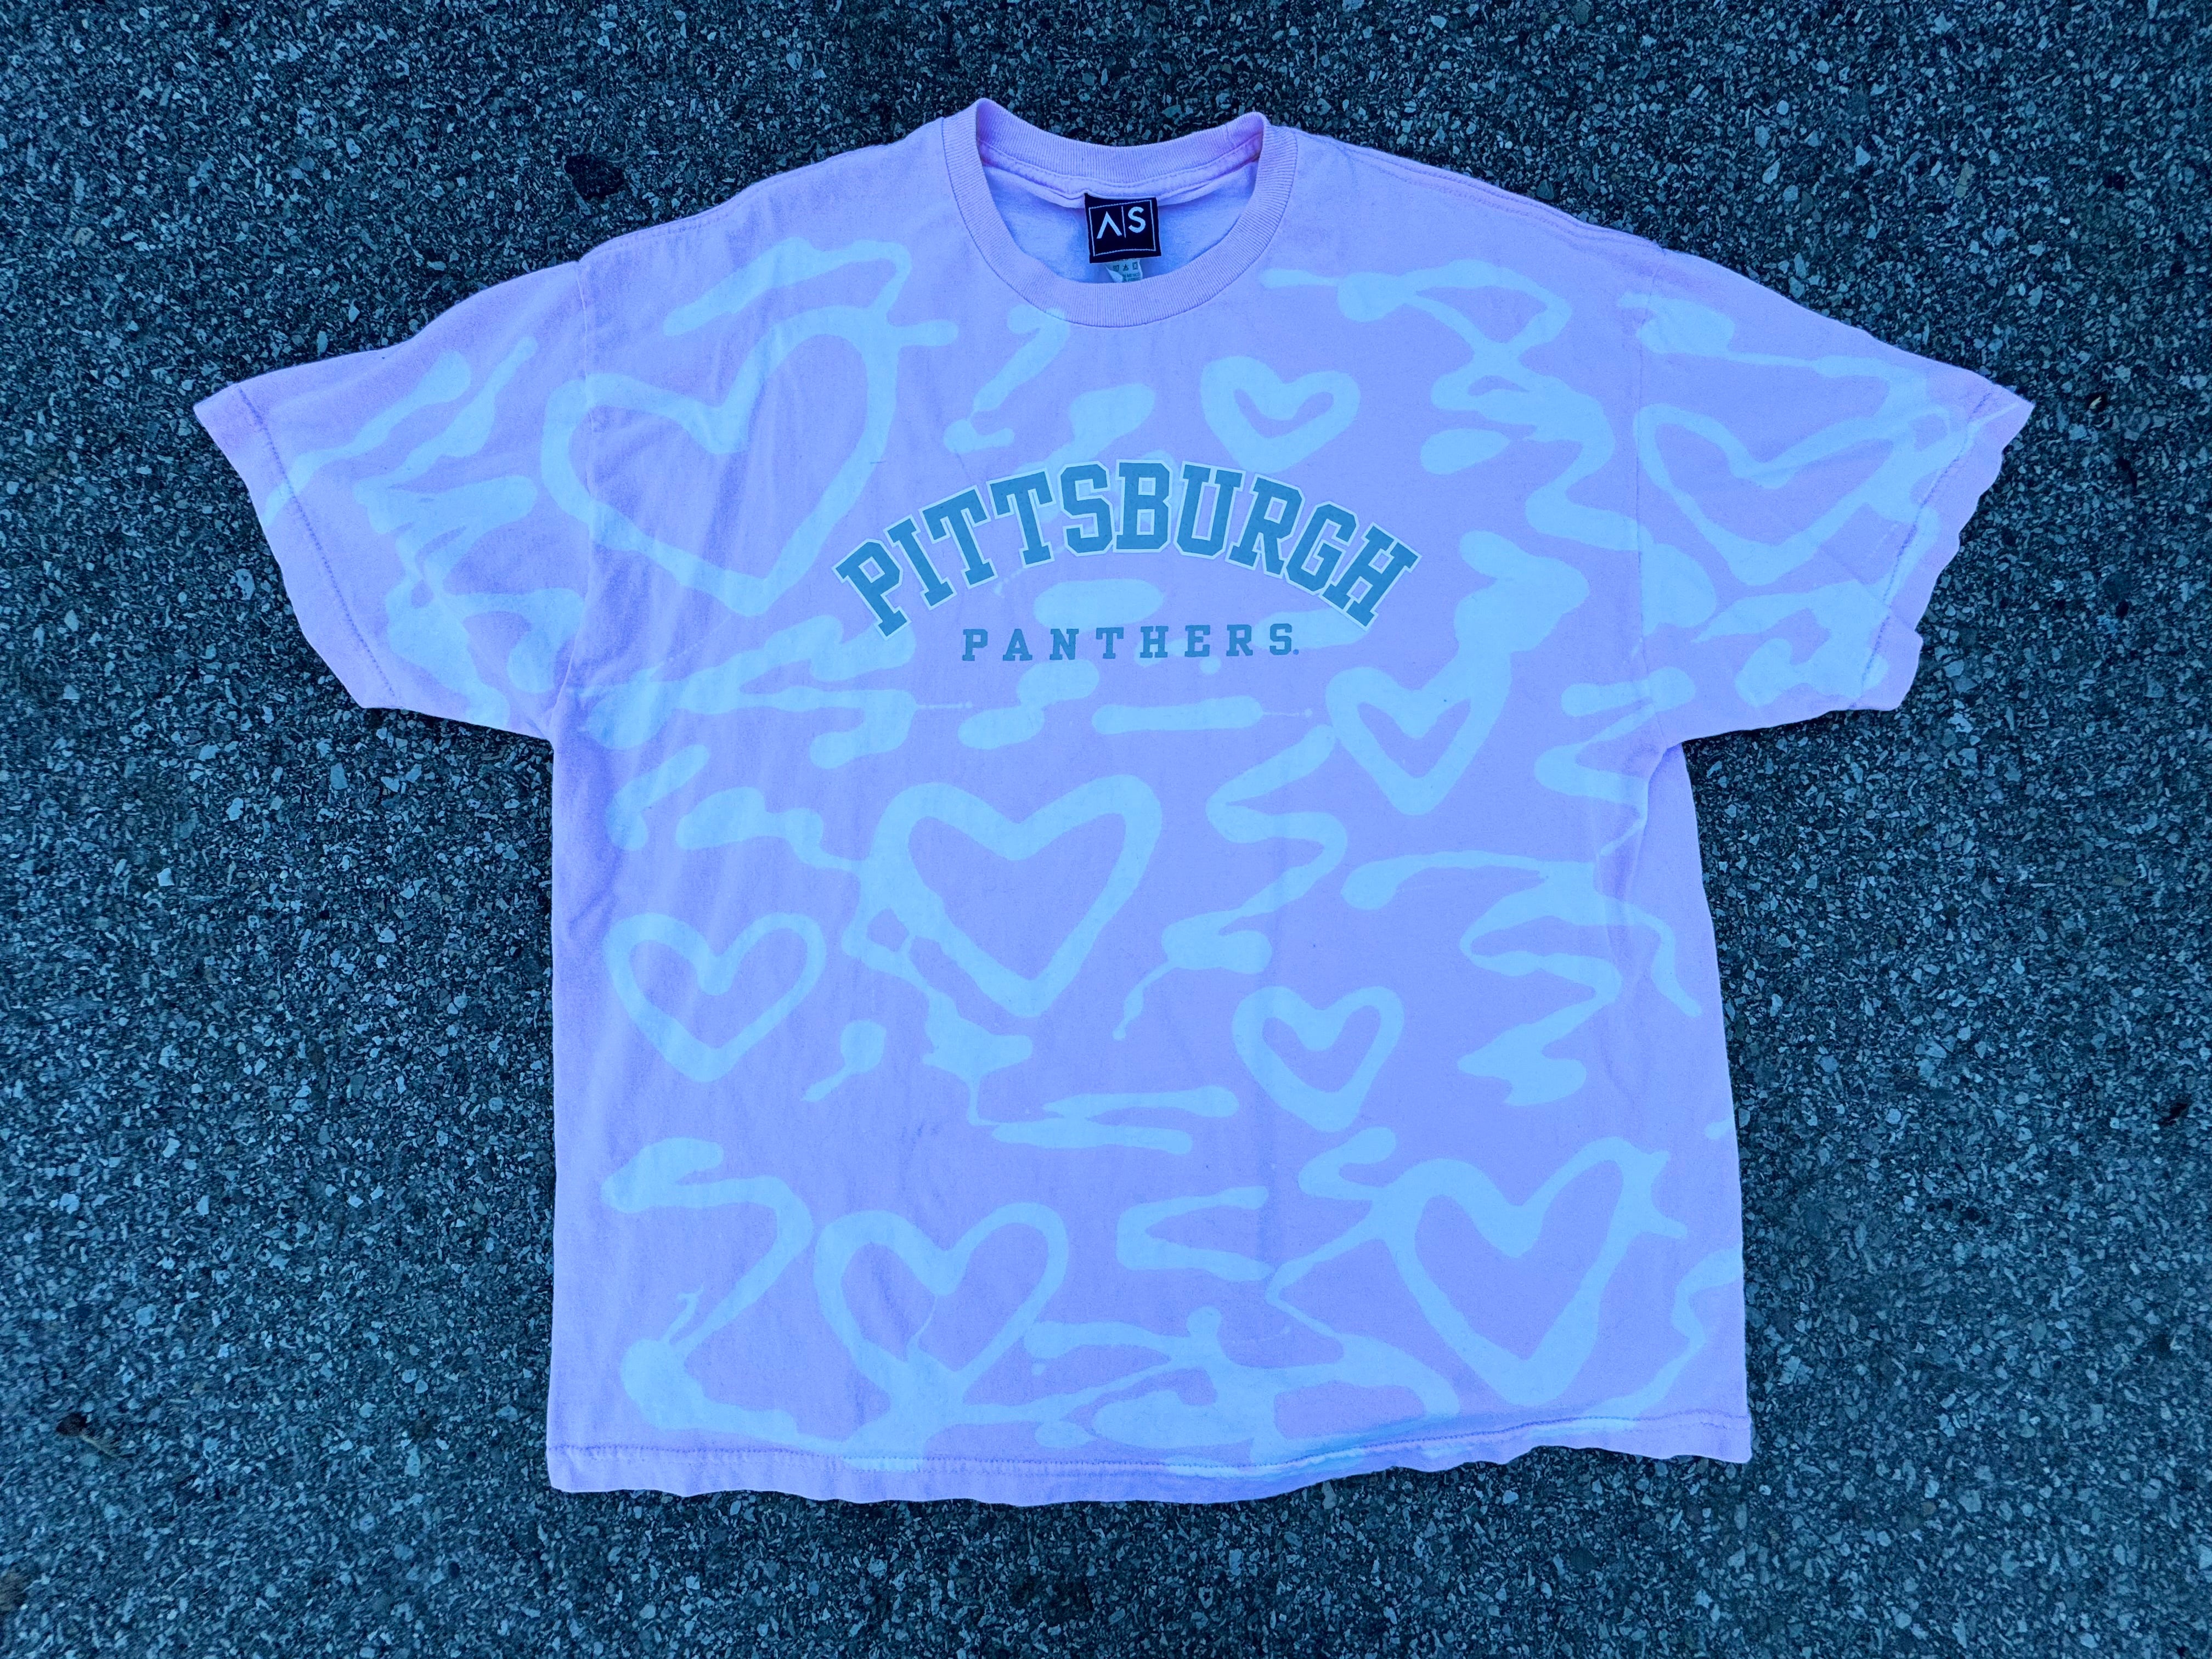 A Lil Pitt in Love With You Tee